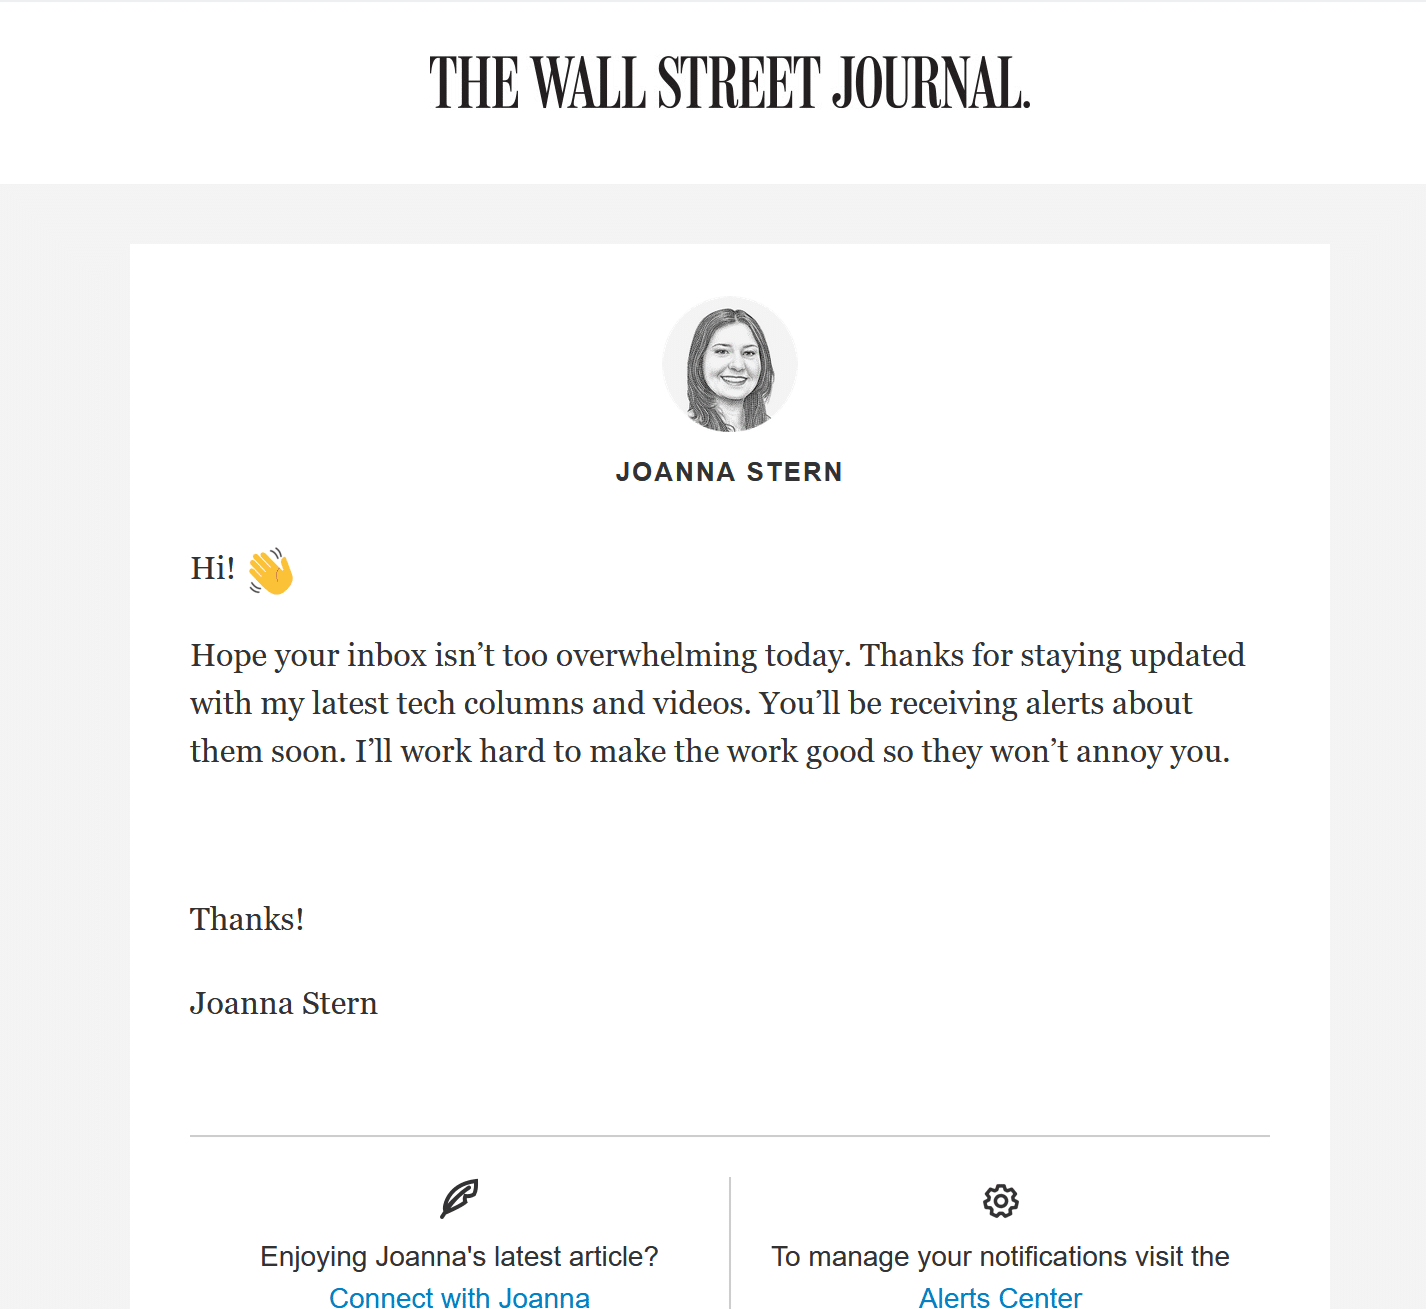 wsj-example-email